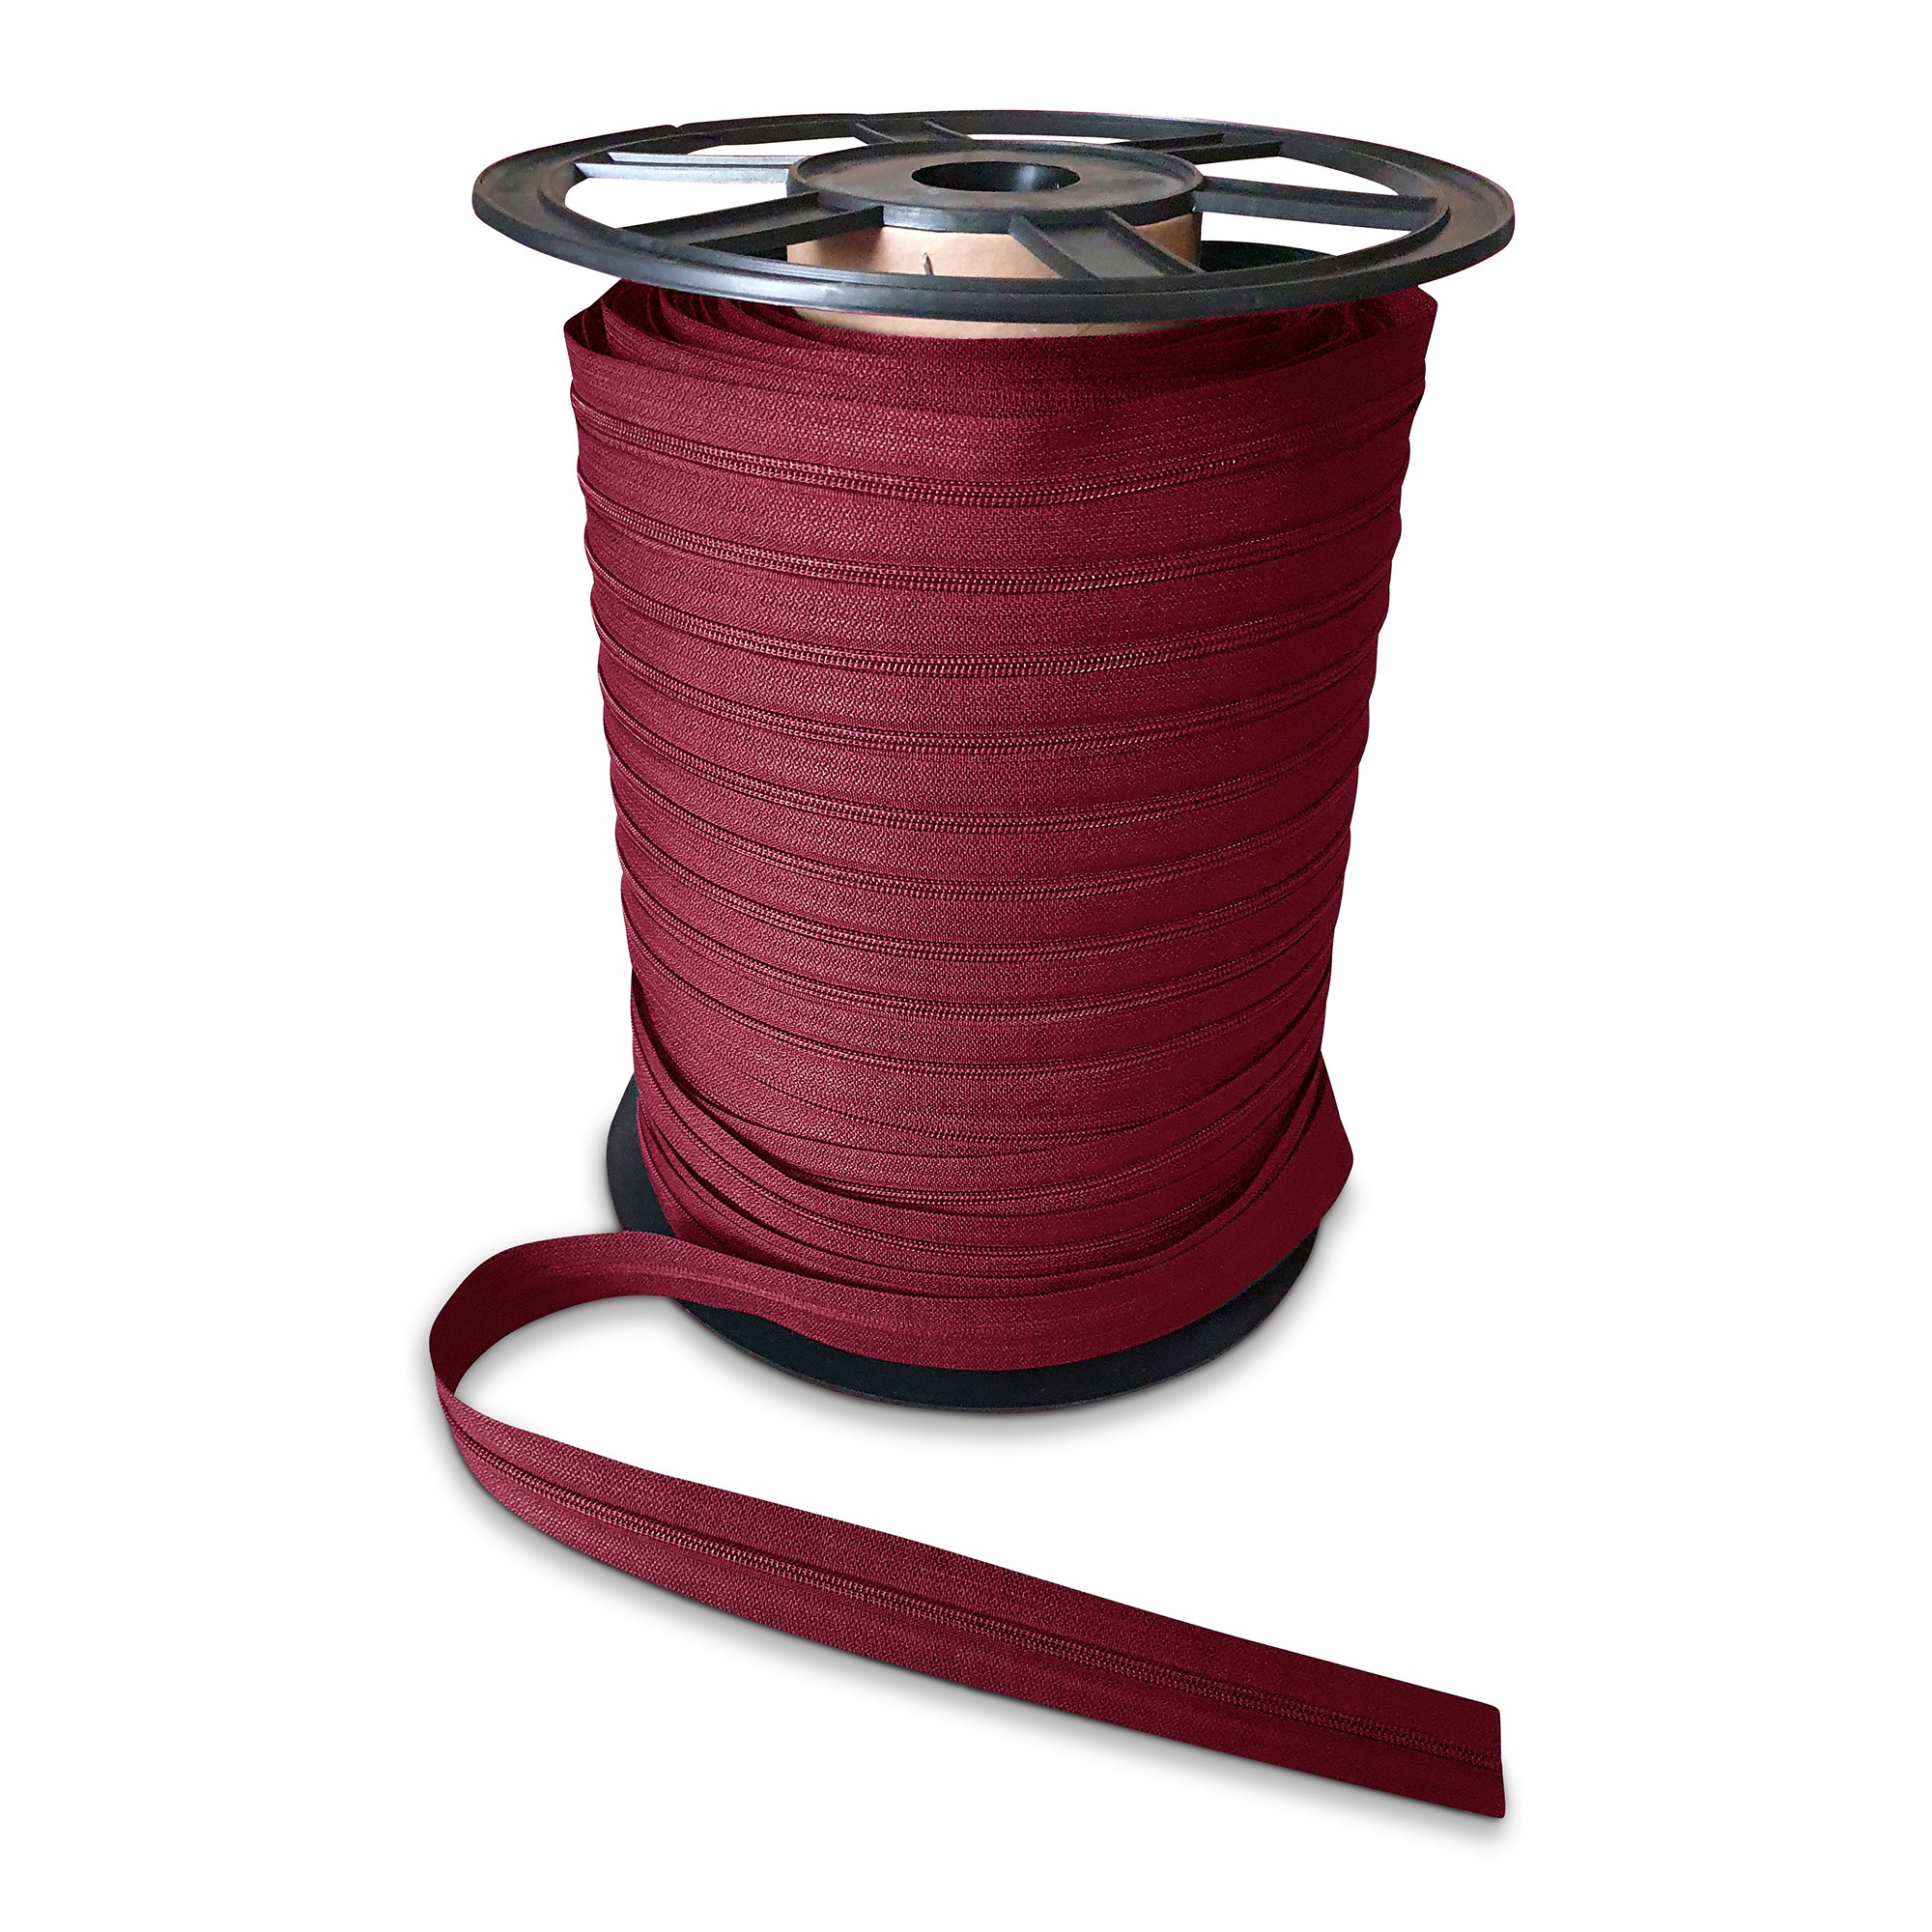 zipper endless, not divisible, PES spiral, fein, wine red